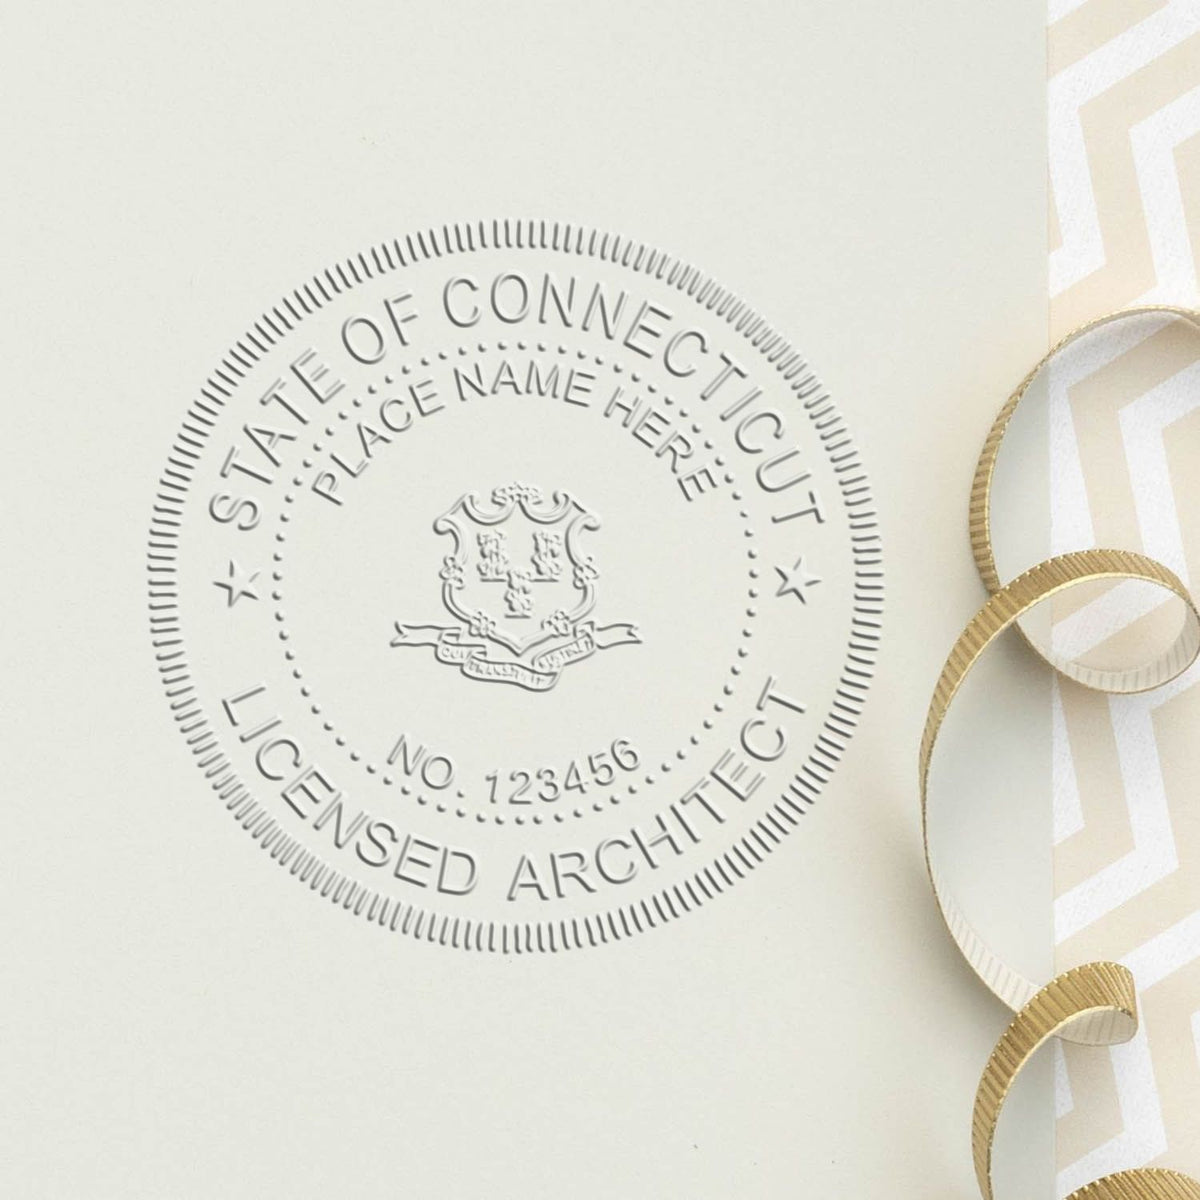 This paper is stamped with a sample imprint of the Extended Long Reach Connecticut Architect Seal Embosser, signifying its quality and reliability.